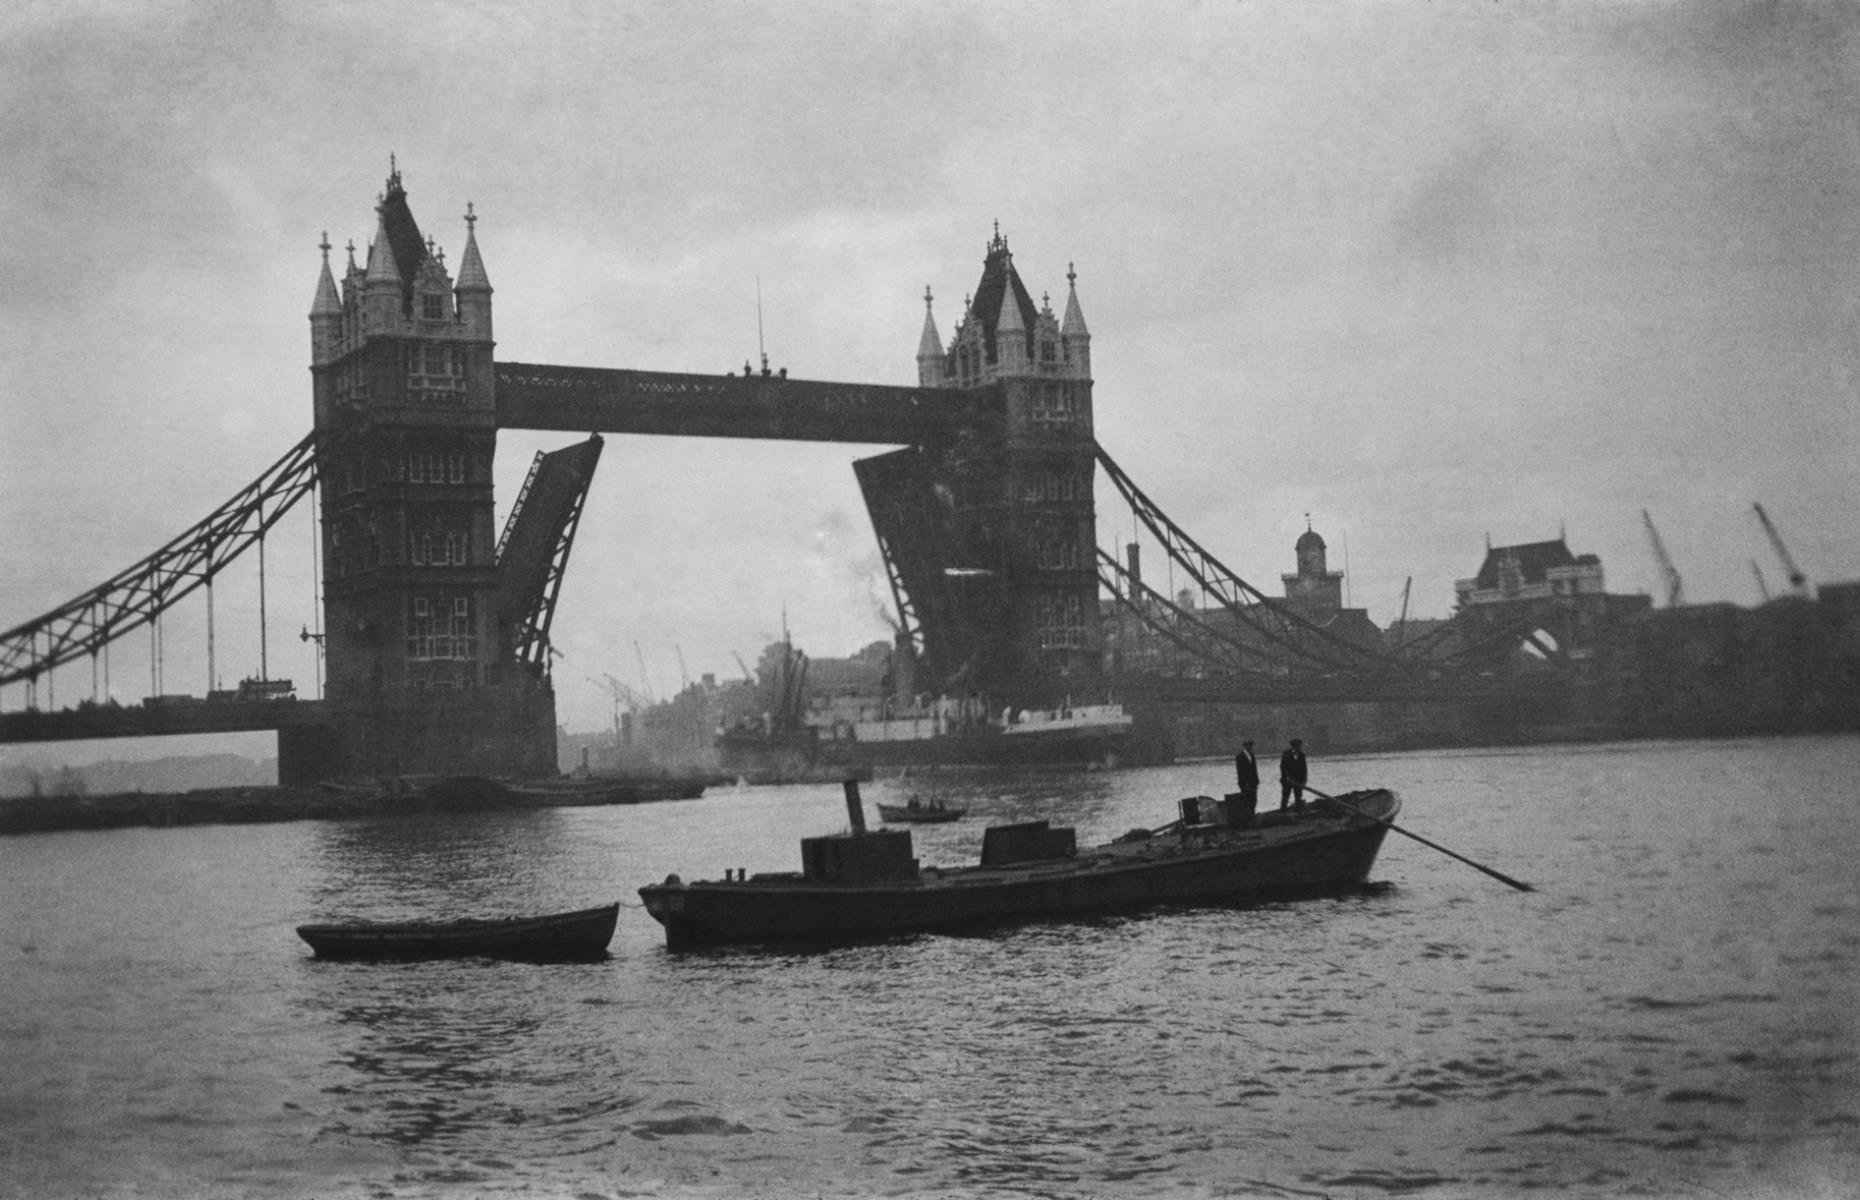 Little more than two decades old when this picture was taken, Tower Bridge was completed in 1894. The 200-foot (61m) high, 800-feet (240m) long bridge was the largest and most complex bascule bridge of its time – a type of bridge with two split sections which can be raised to allow boats to pass through. The bascules were originally powered by steam and took just a minute to rise fully, although they’re now rarely used.